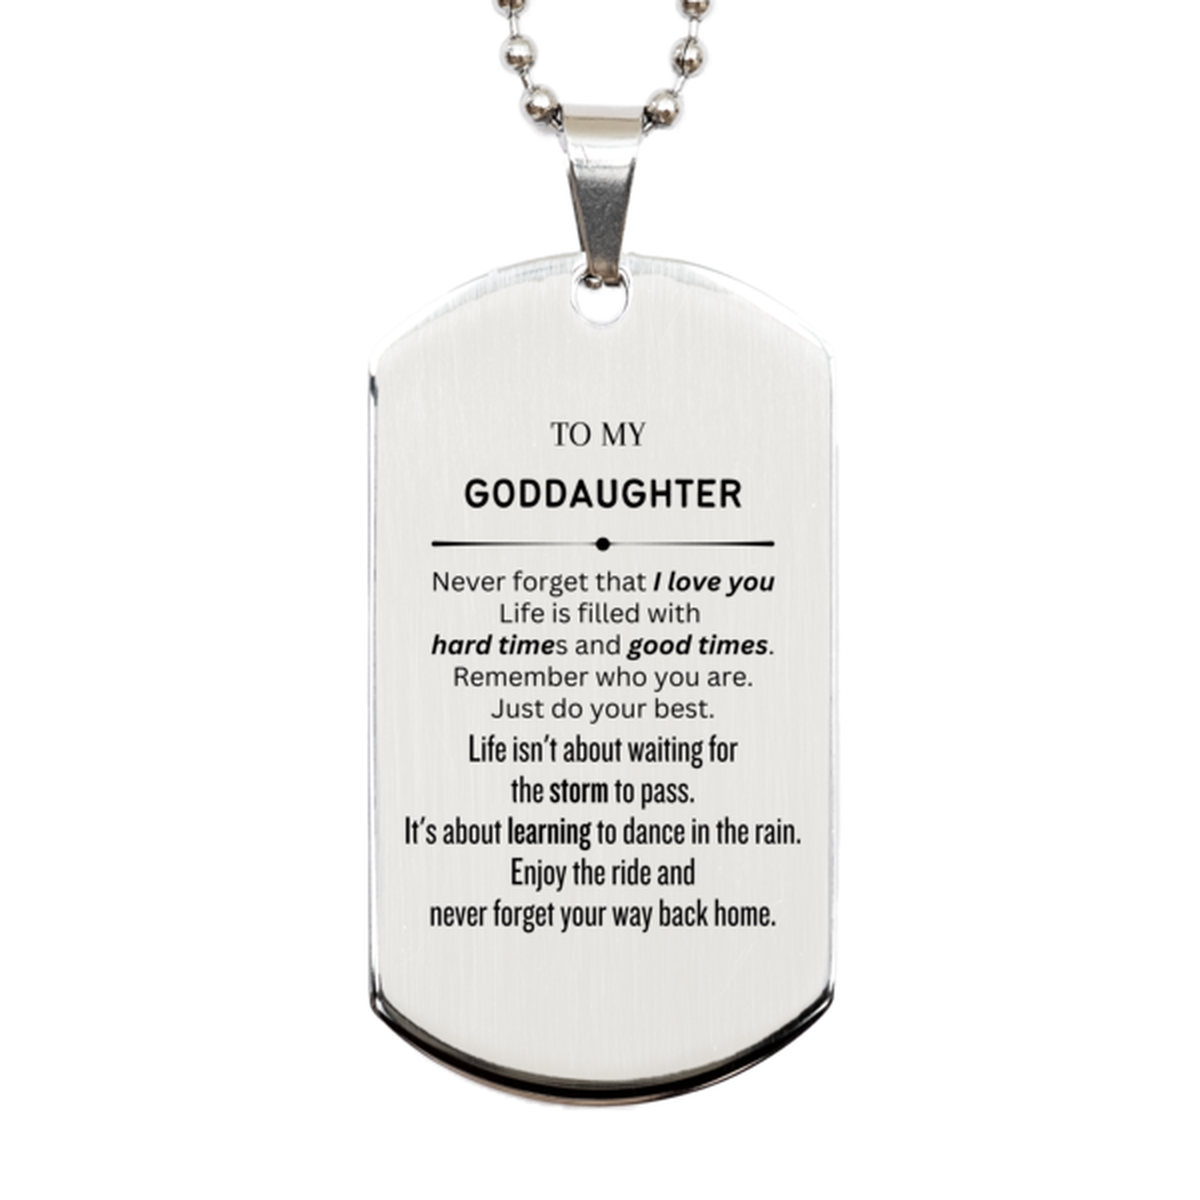 Christmas Goddaughter Silver Dog Tag Gifts, To My Goddaughter Birthday Thank You Gifts For Goddaughter, Graduation Unique Gifts For Goddaughter To My Goddaughter Never forget that I love you life is filled with hard times and good times. Remember who you